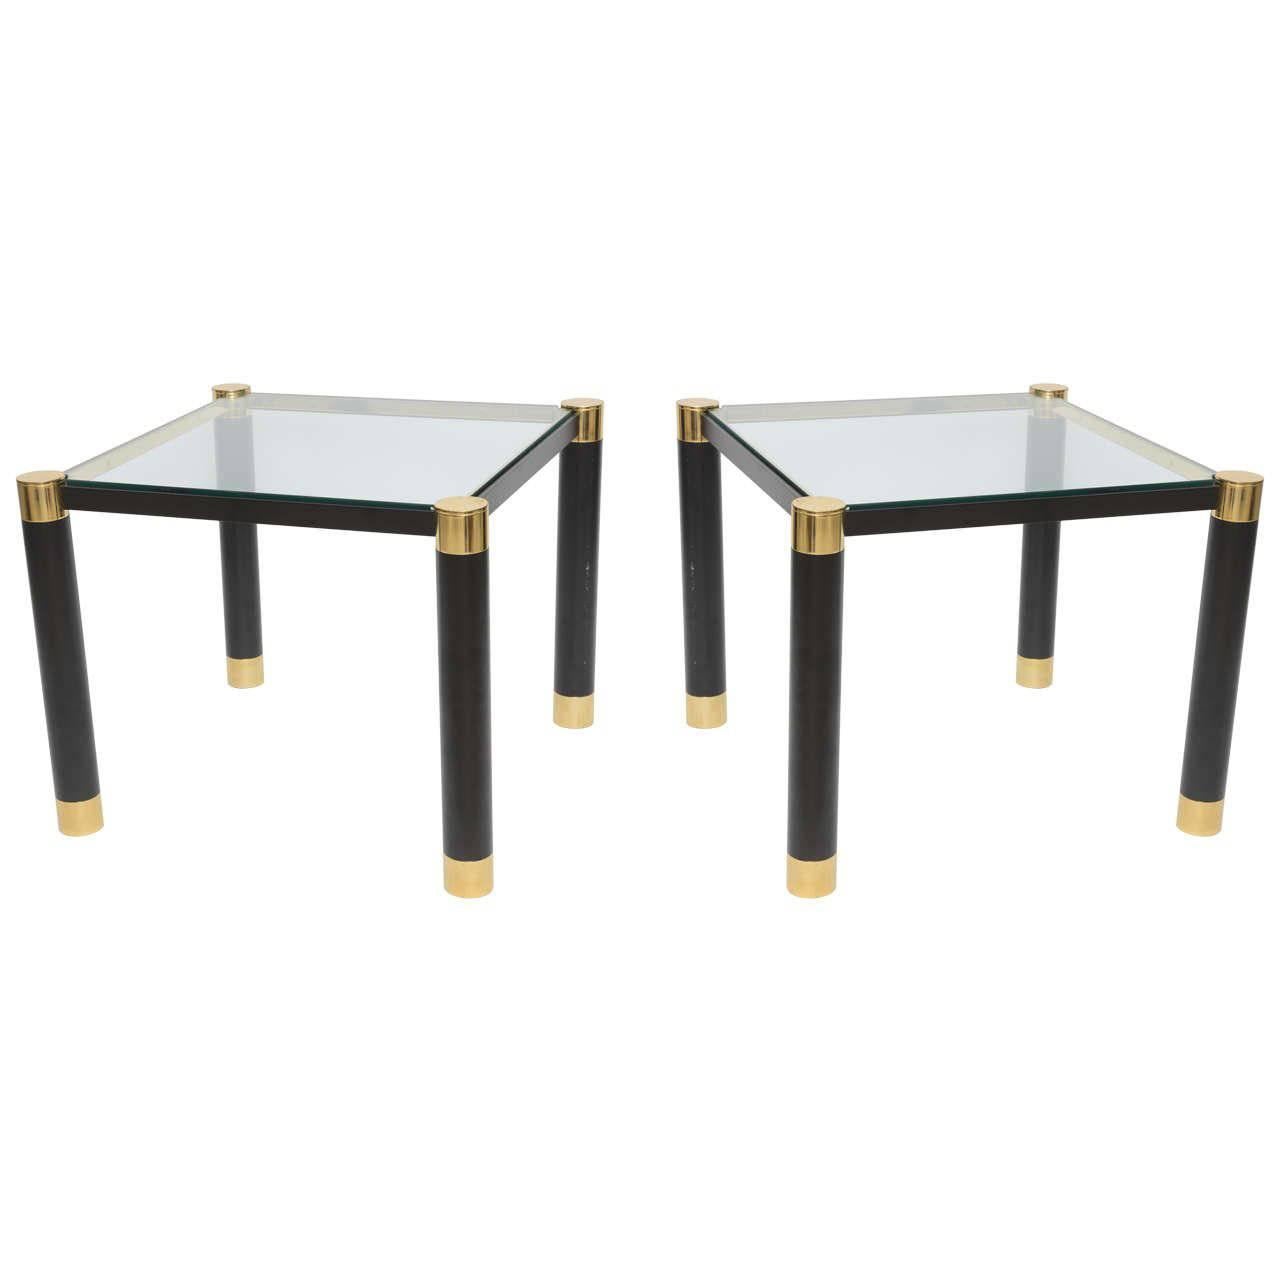 Pair of American Modern Brass and Ebonized Glass Top Tables, Karl Springer For Sale